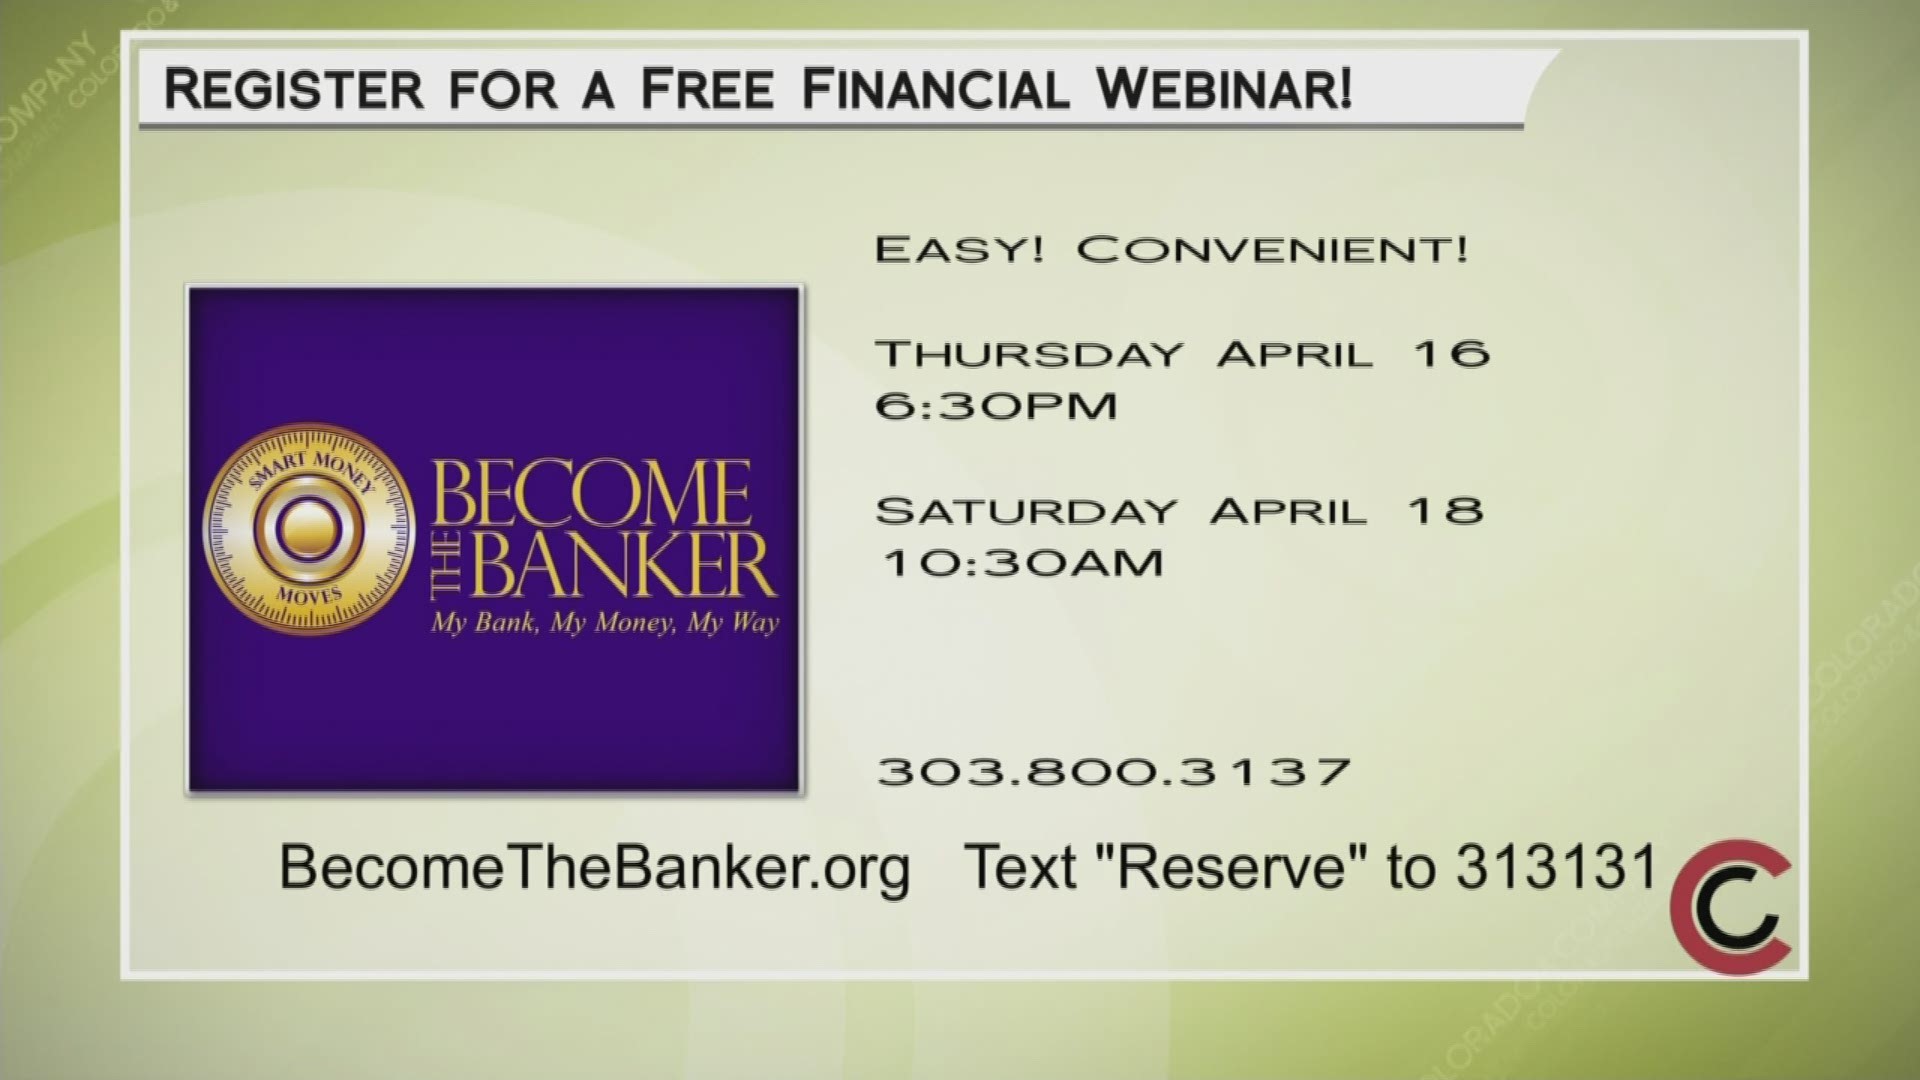 Check out a Become the Banker webinar on either April 16th or 18th. You can call 303.800.3137 or visit BecomeTheBanker.org/Register for more information.